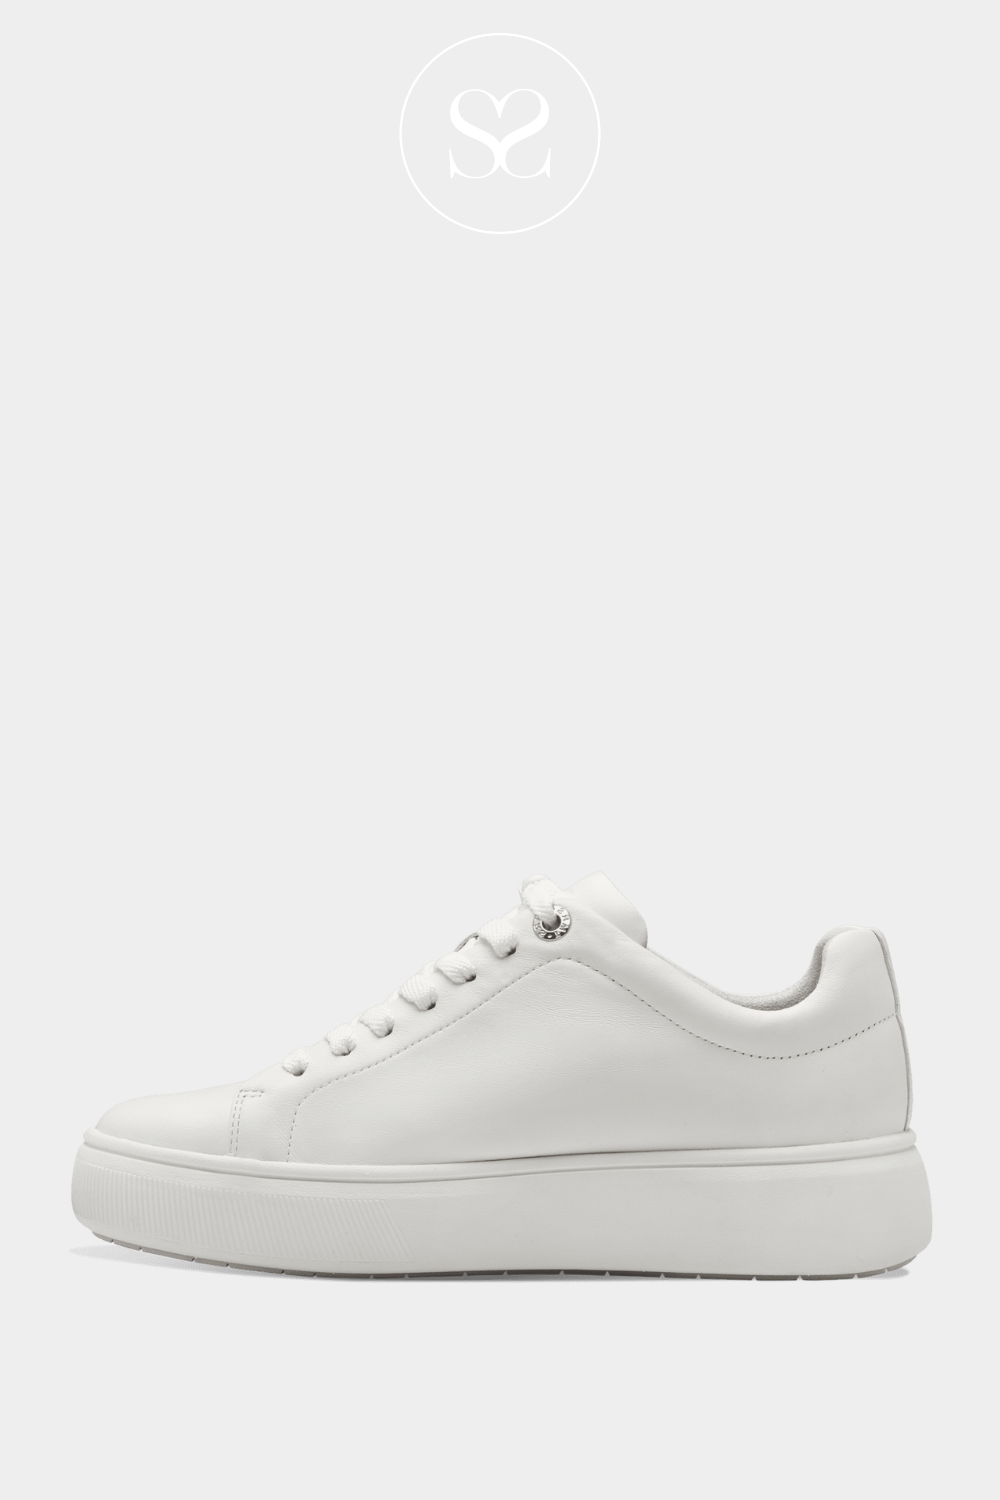 TAMARIS 1-23736-42 WHITE FLATFORM TRAINERS WITH LACES AND SILVER TAMARIS LOGO IN SMALL ON THE SIDE.